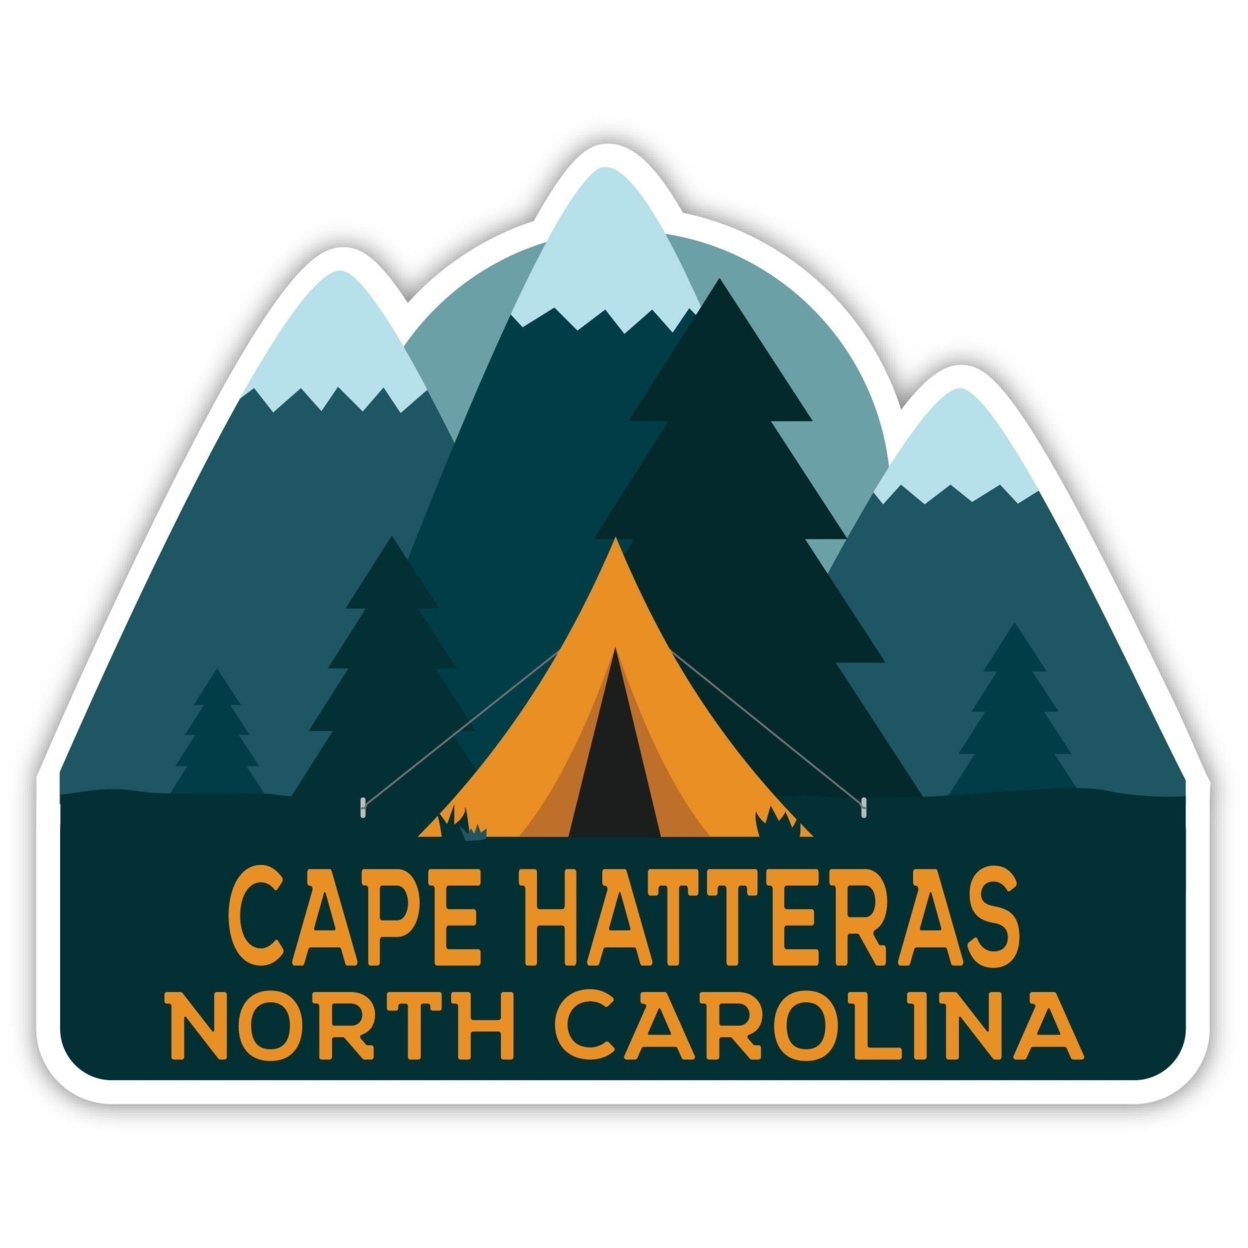 Cape Hatteras North Carolina Souvenir Decorative Stickers (Choose Theme And Size) - 4-Pack, 12-Inch, Tent